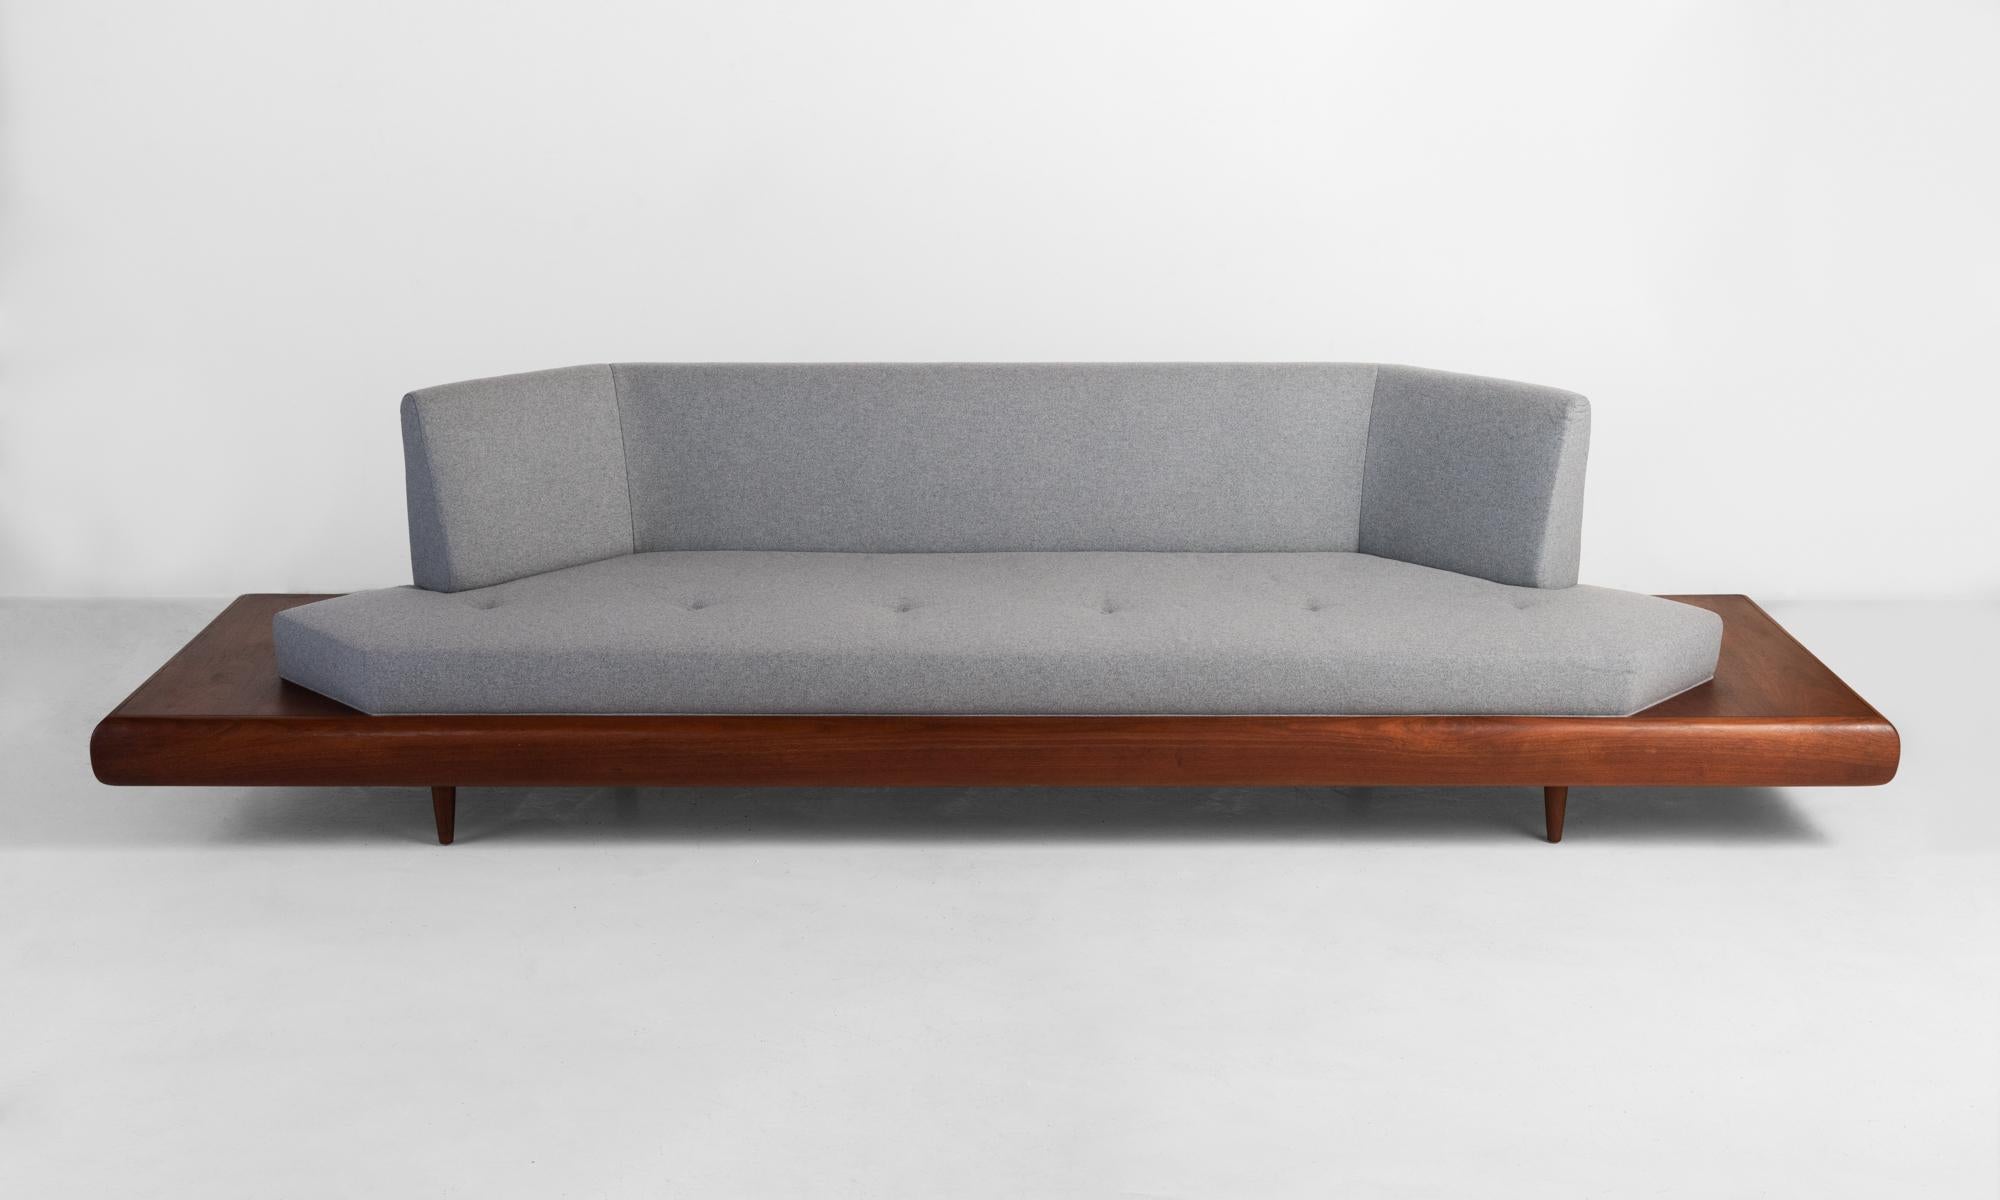 Platform Sofa by Adrian Pearsall, circa 1960.

Produced for Craft Associates; Upholstered seat and back on walnut platform base.